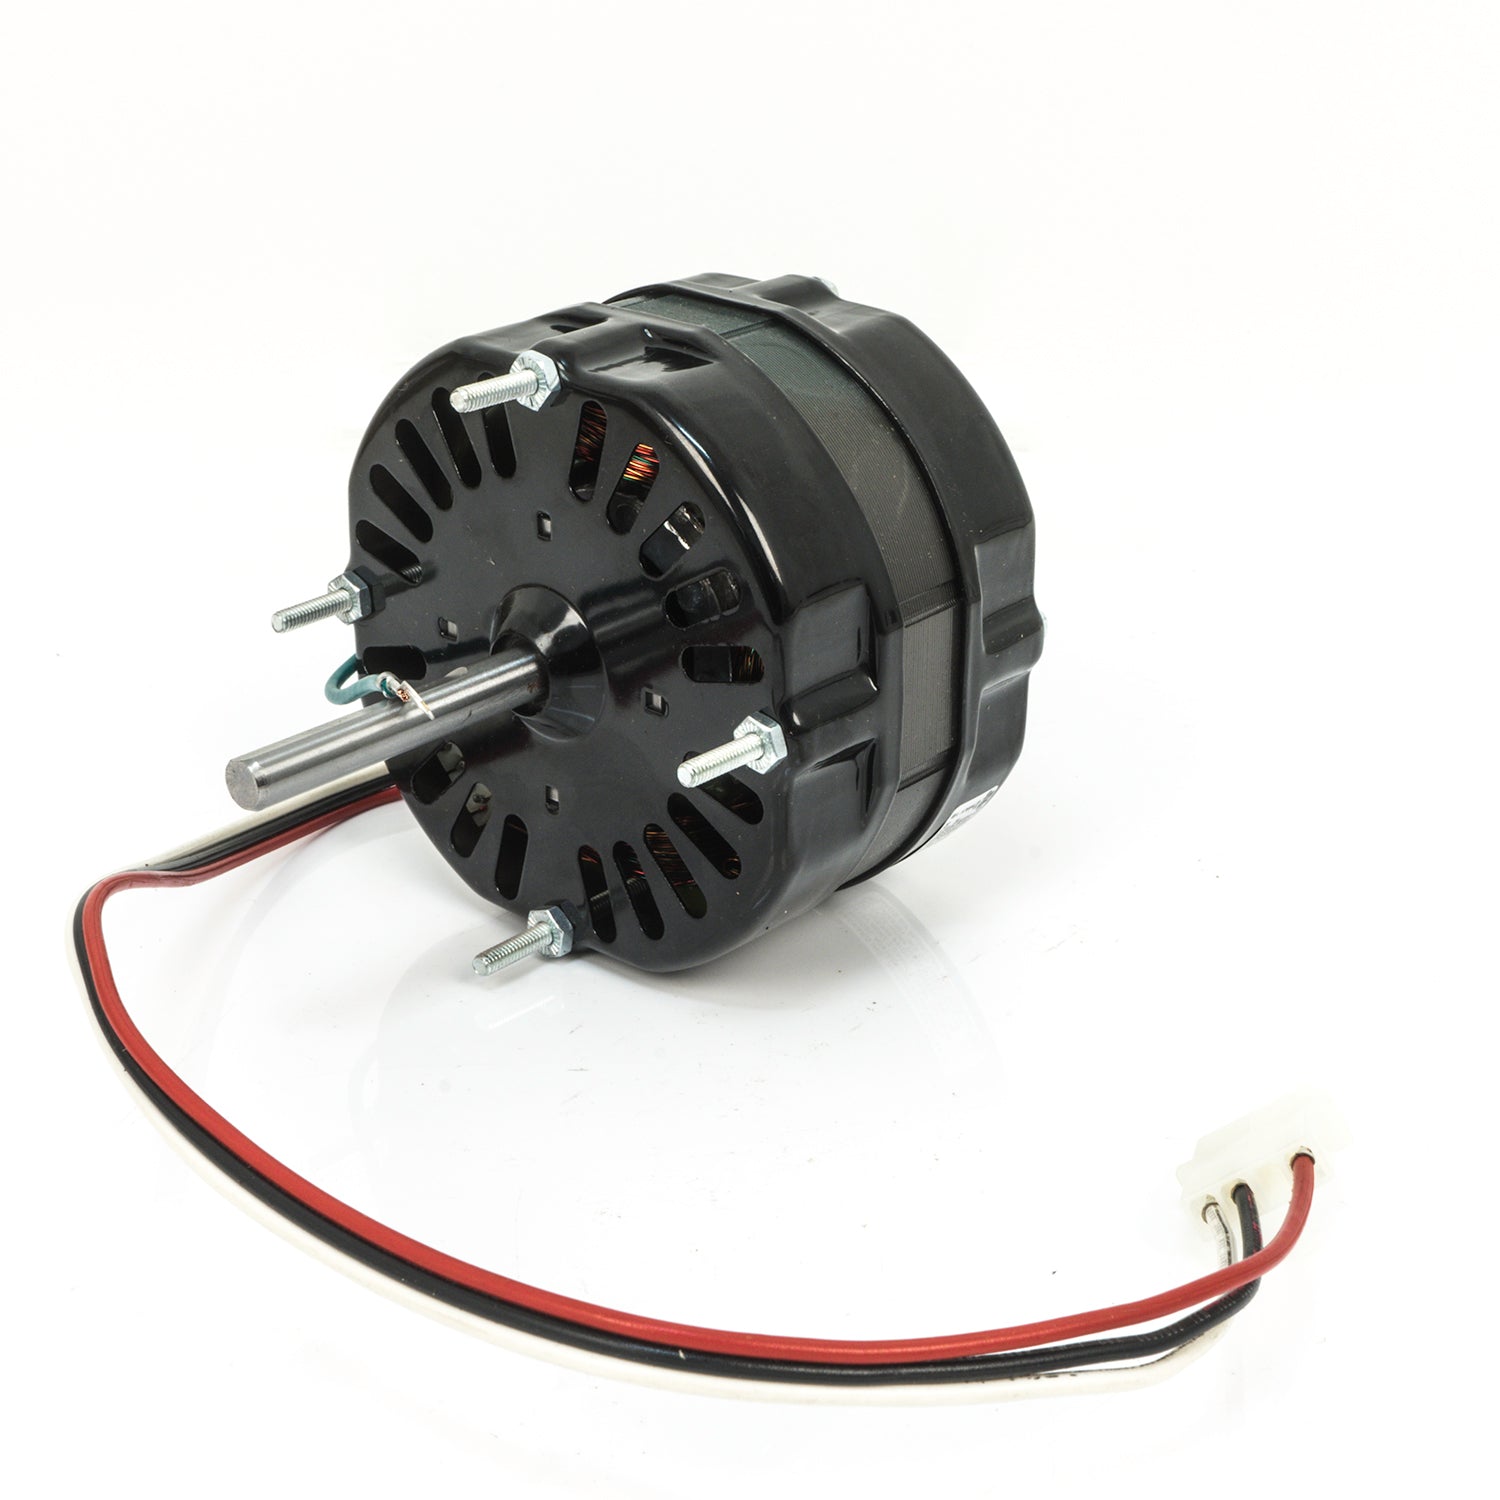 Packard 90320, HVAC/R Motors, OEM Replacement, Shaded Pole.